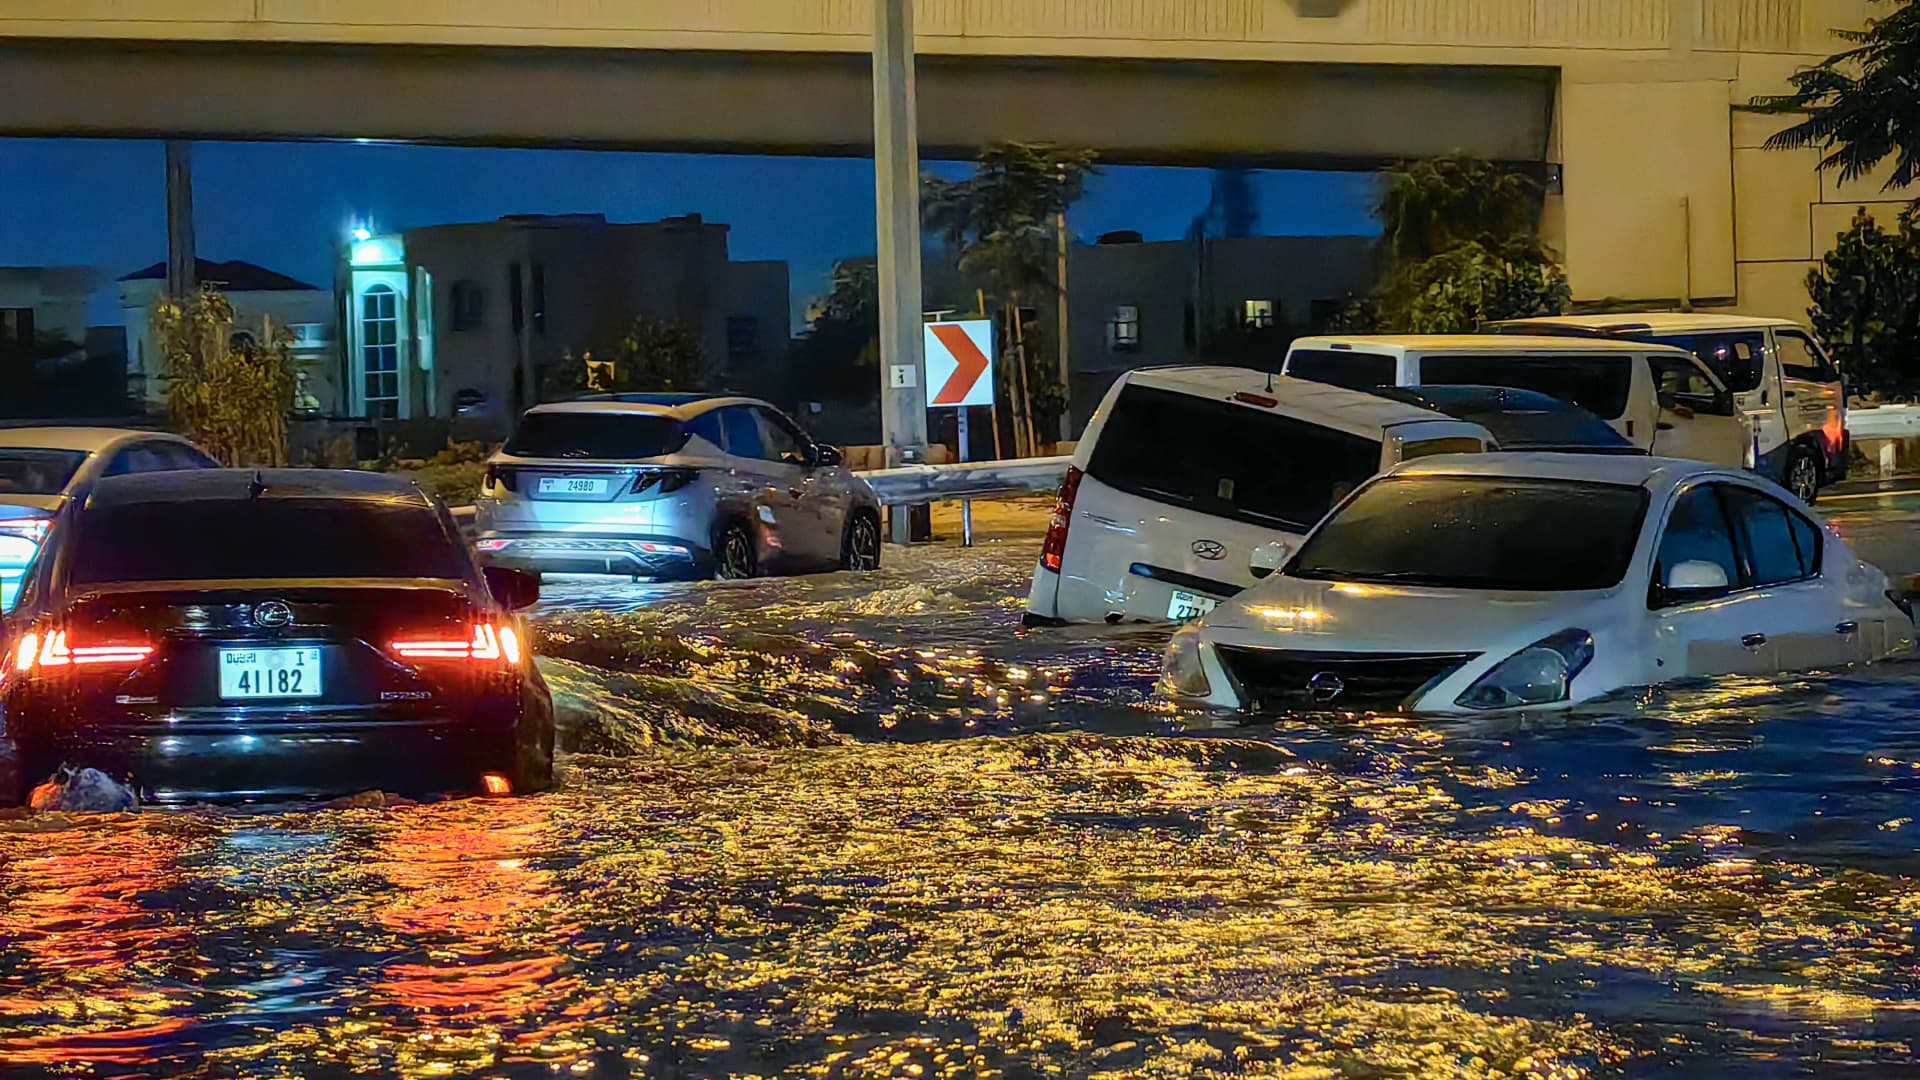 Dubai property boss says floods were overexaggerated: ‘Things like that happen in Miami regularly’